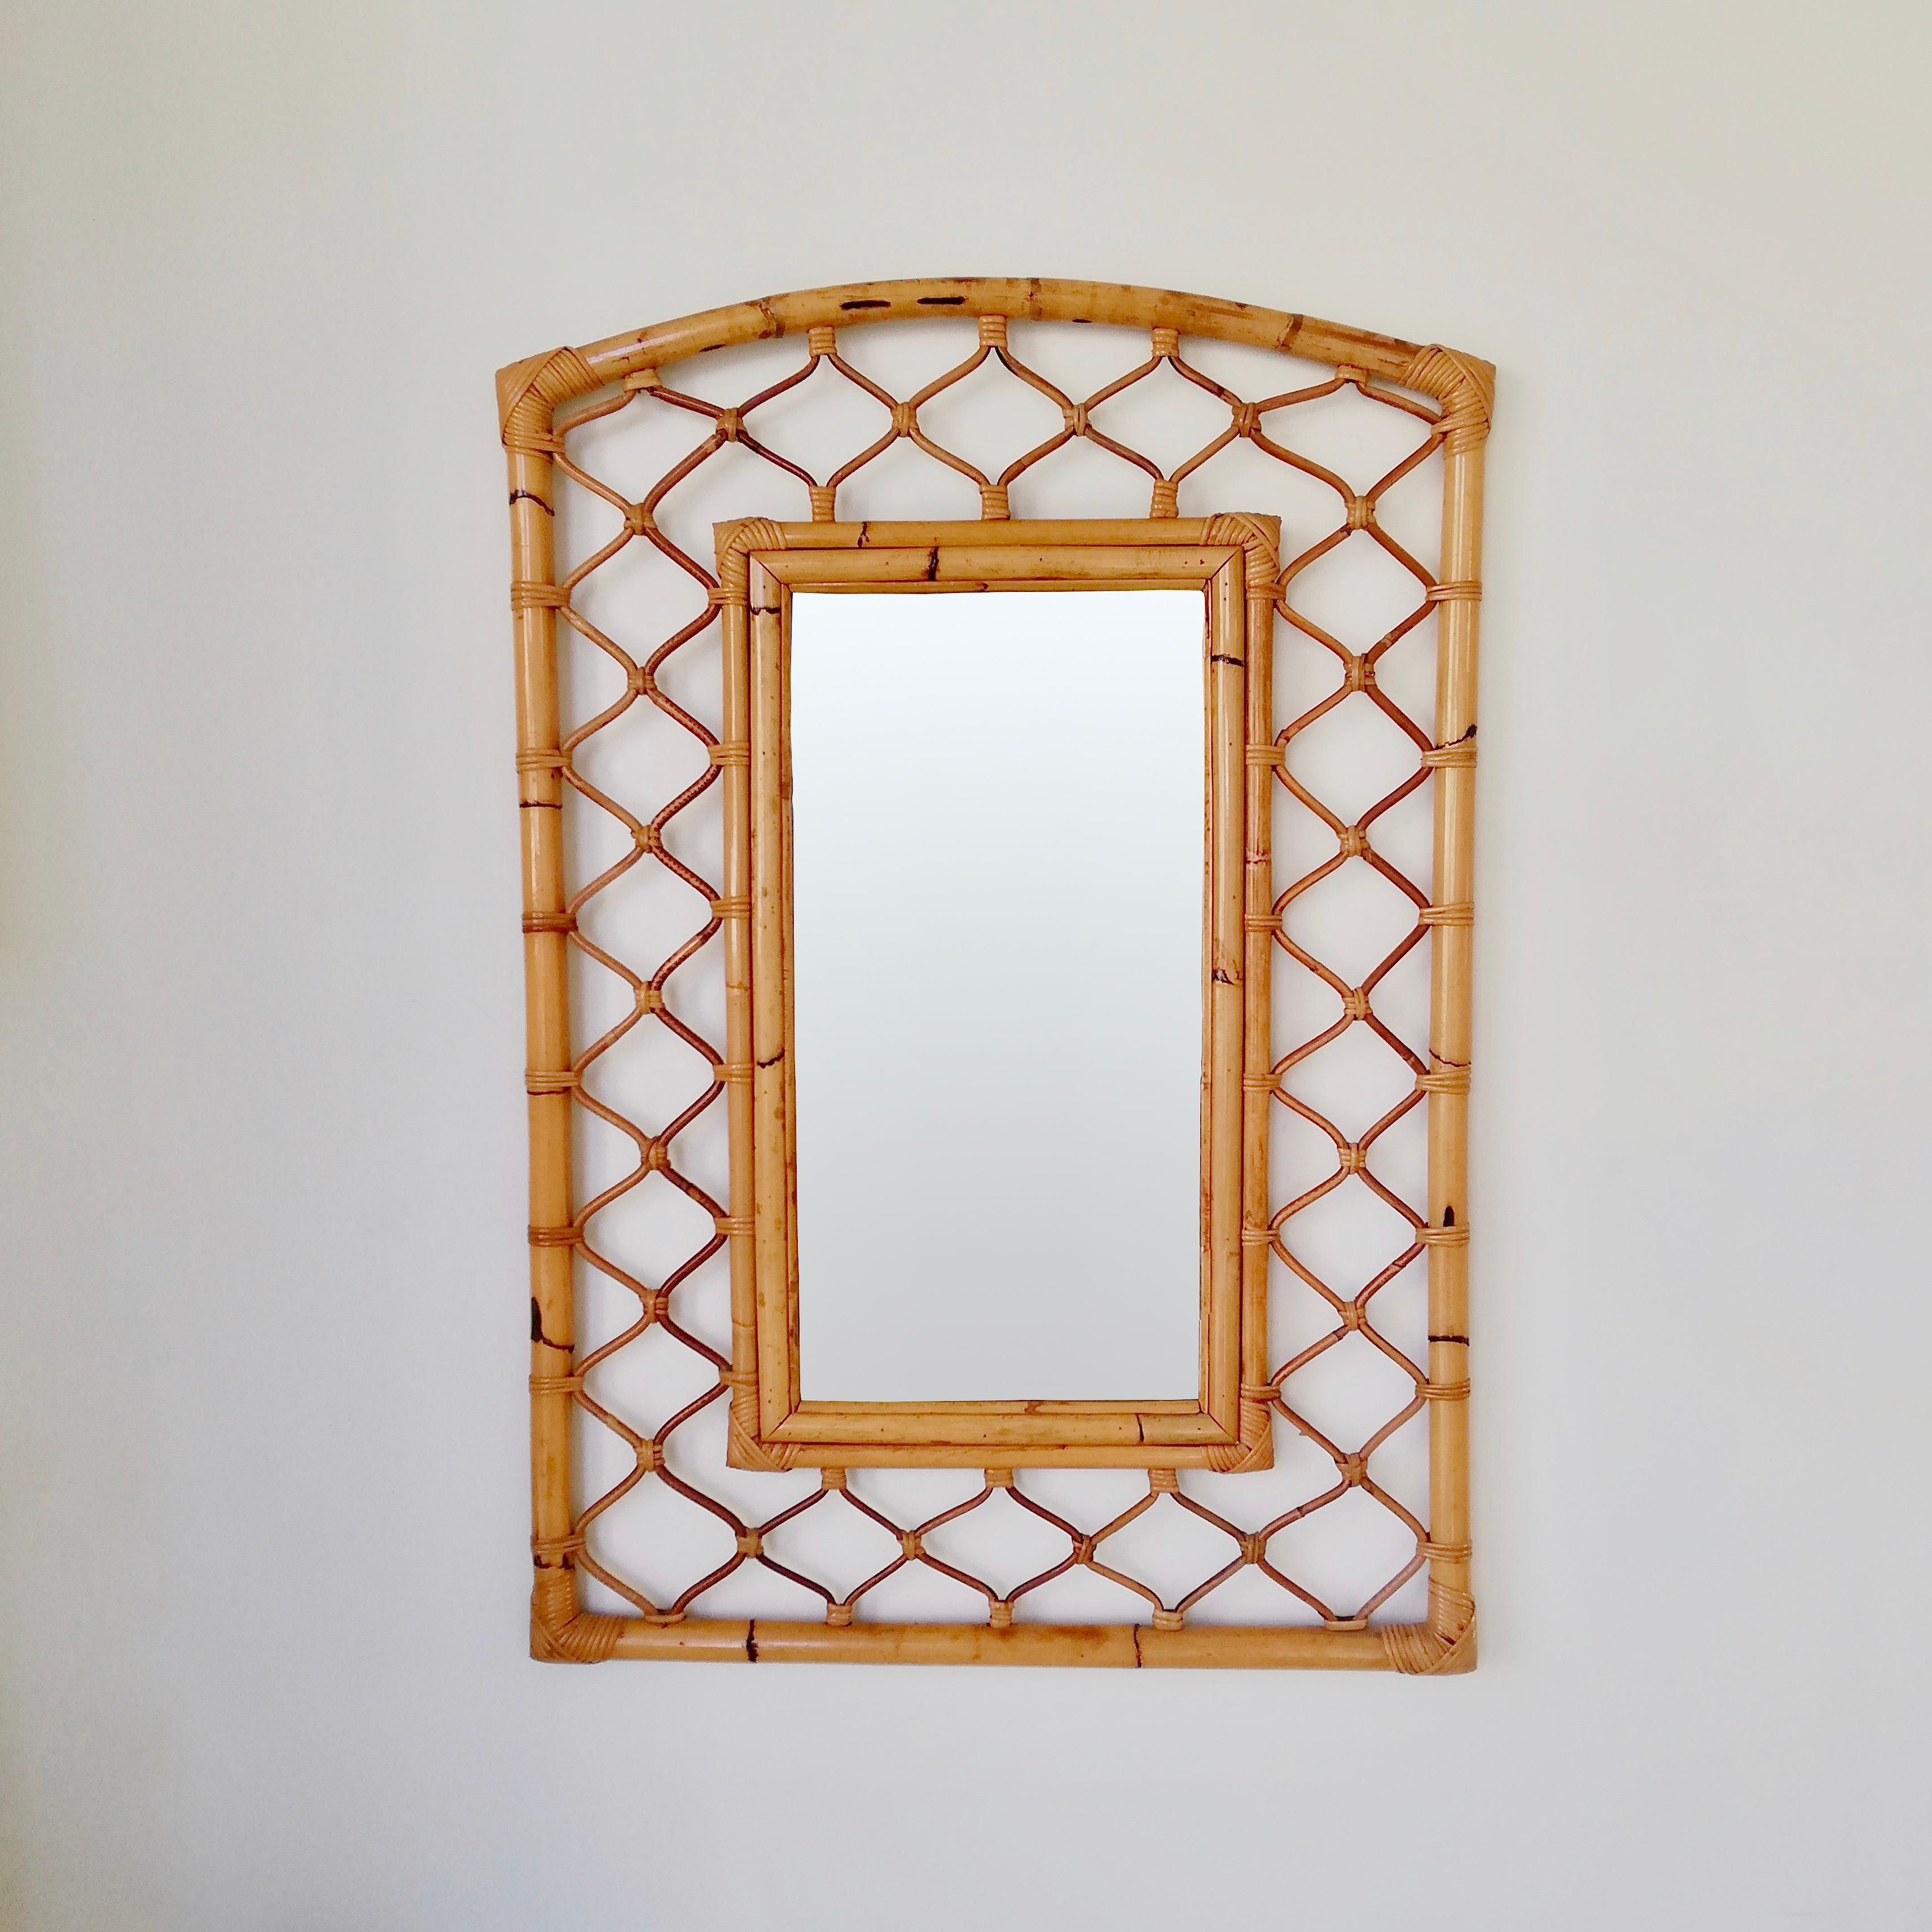 Nice large decorative mirror, circa 1970, France.
French riviera style.
Bamboo, rattan.
Dimensions: 105 H, 75 cm W, 4 cm D.
All purchases are covered by our Buyer Protection Guarantee.
This item can be returned within 14 days of delivery.

  